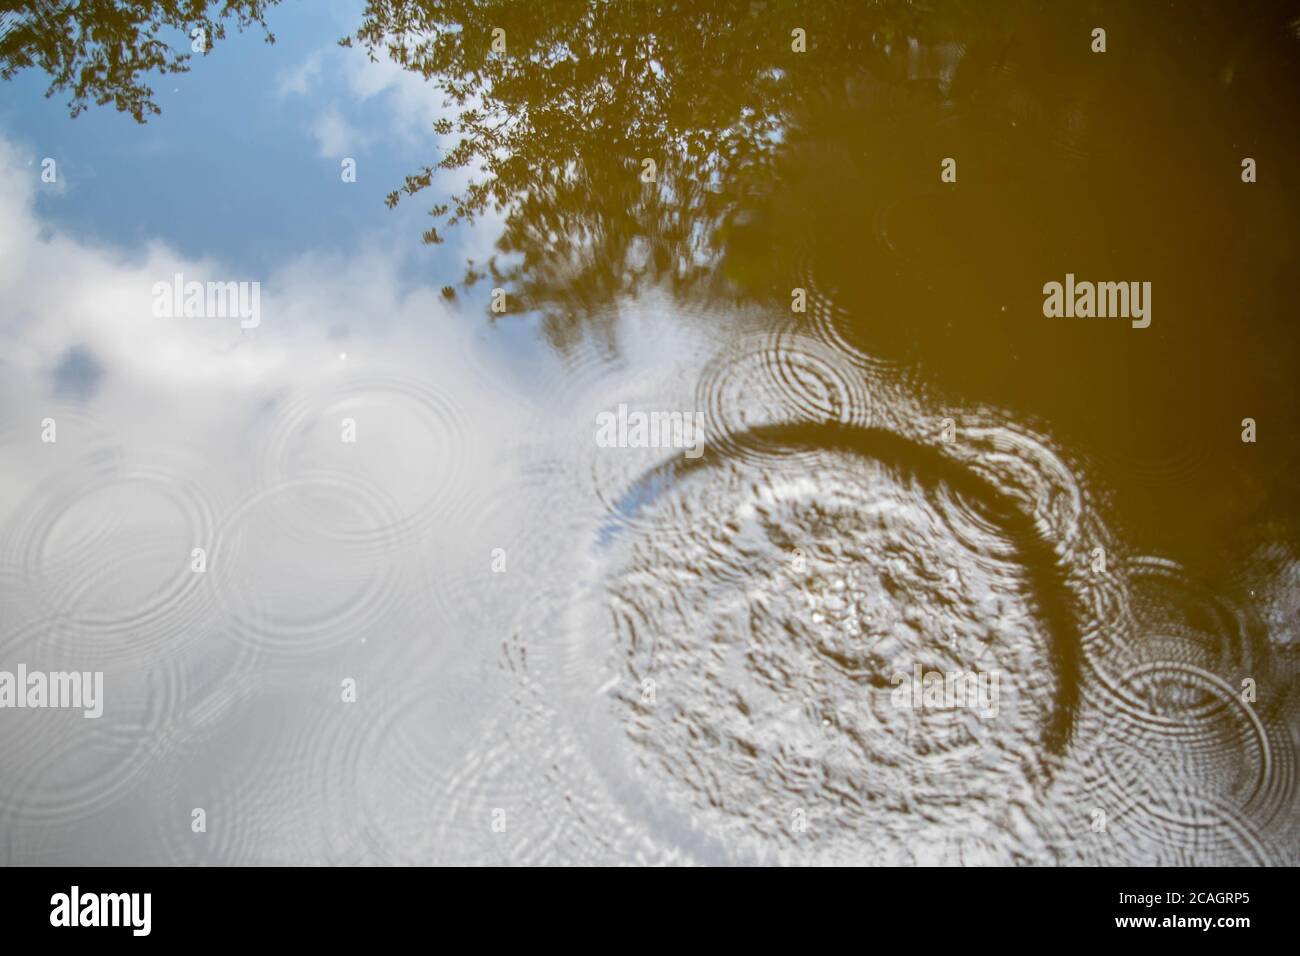 Surreal abstract close up of forest reflection in pond. Circular ripples cause a disturbance. Blue sky and leaves visible in water. Stock Photo